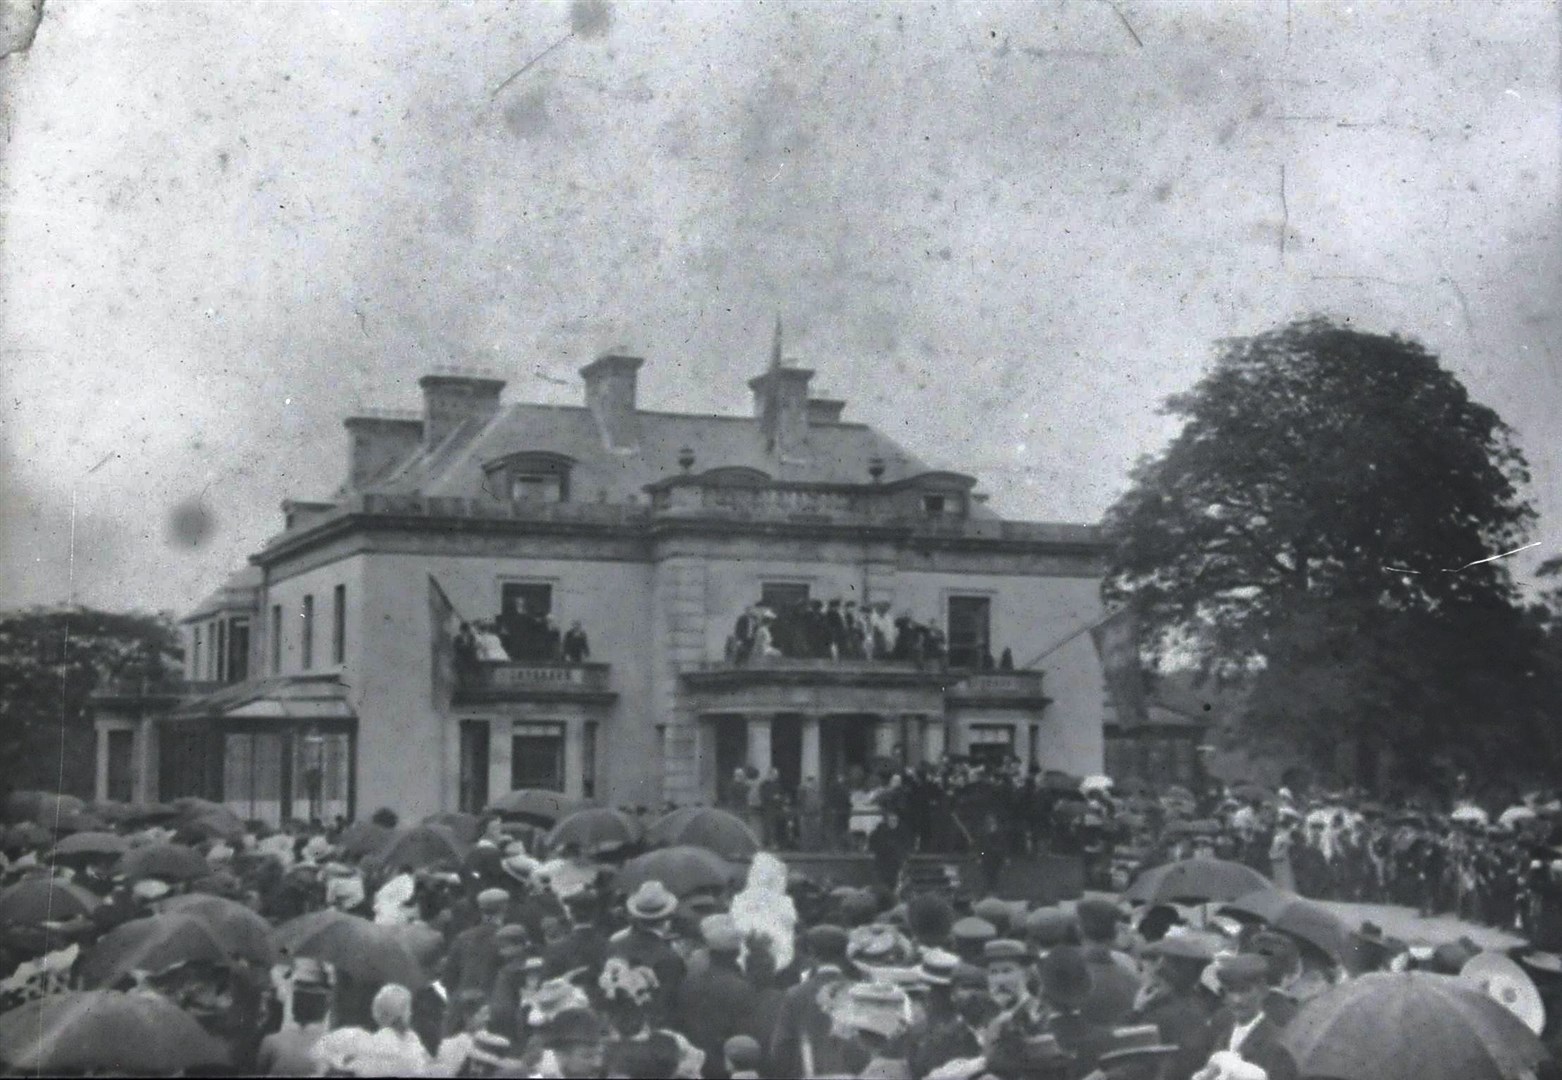 Grant Lodge being handed over as a gift to the people of Elgin in 1903.